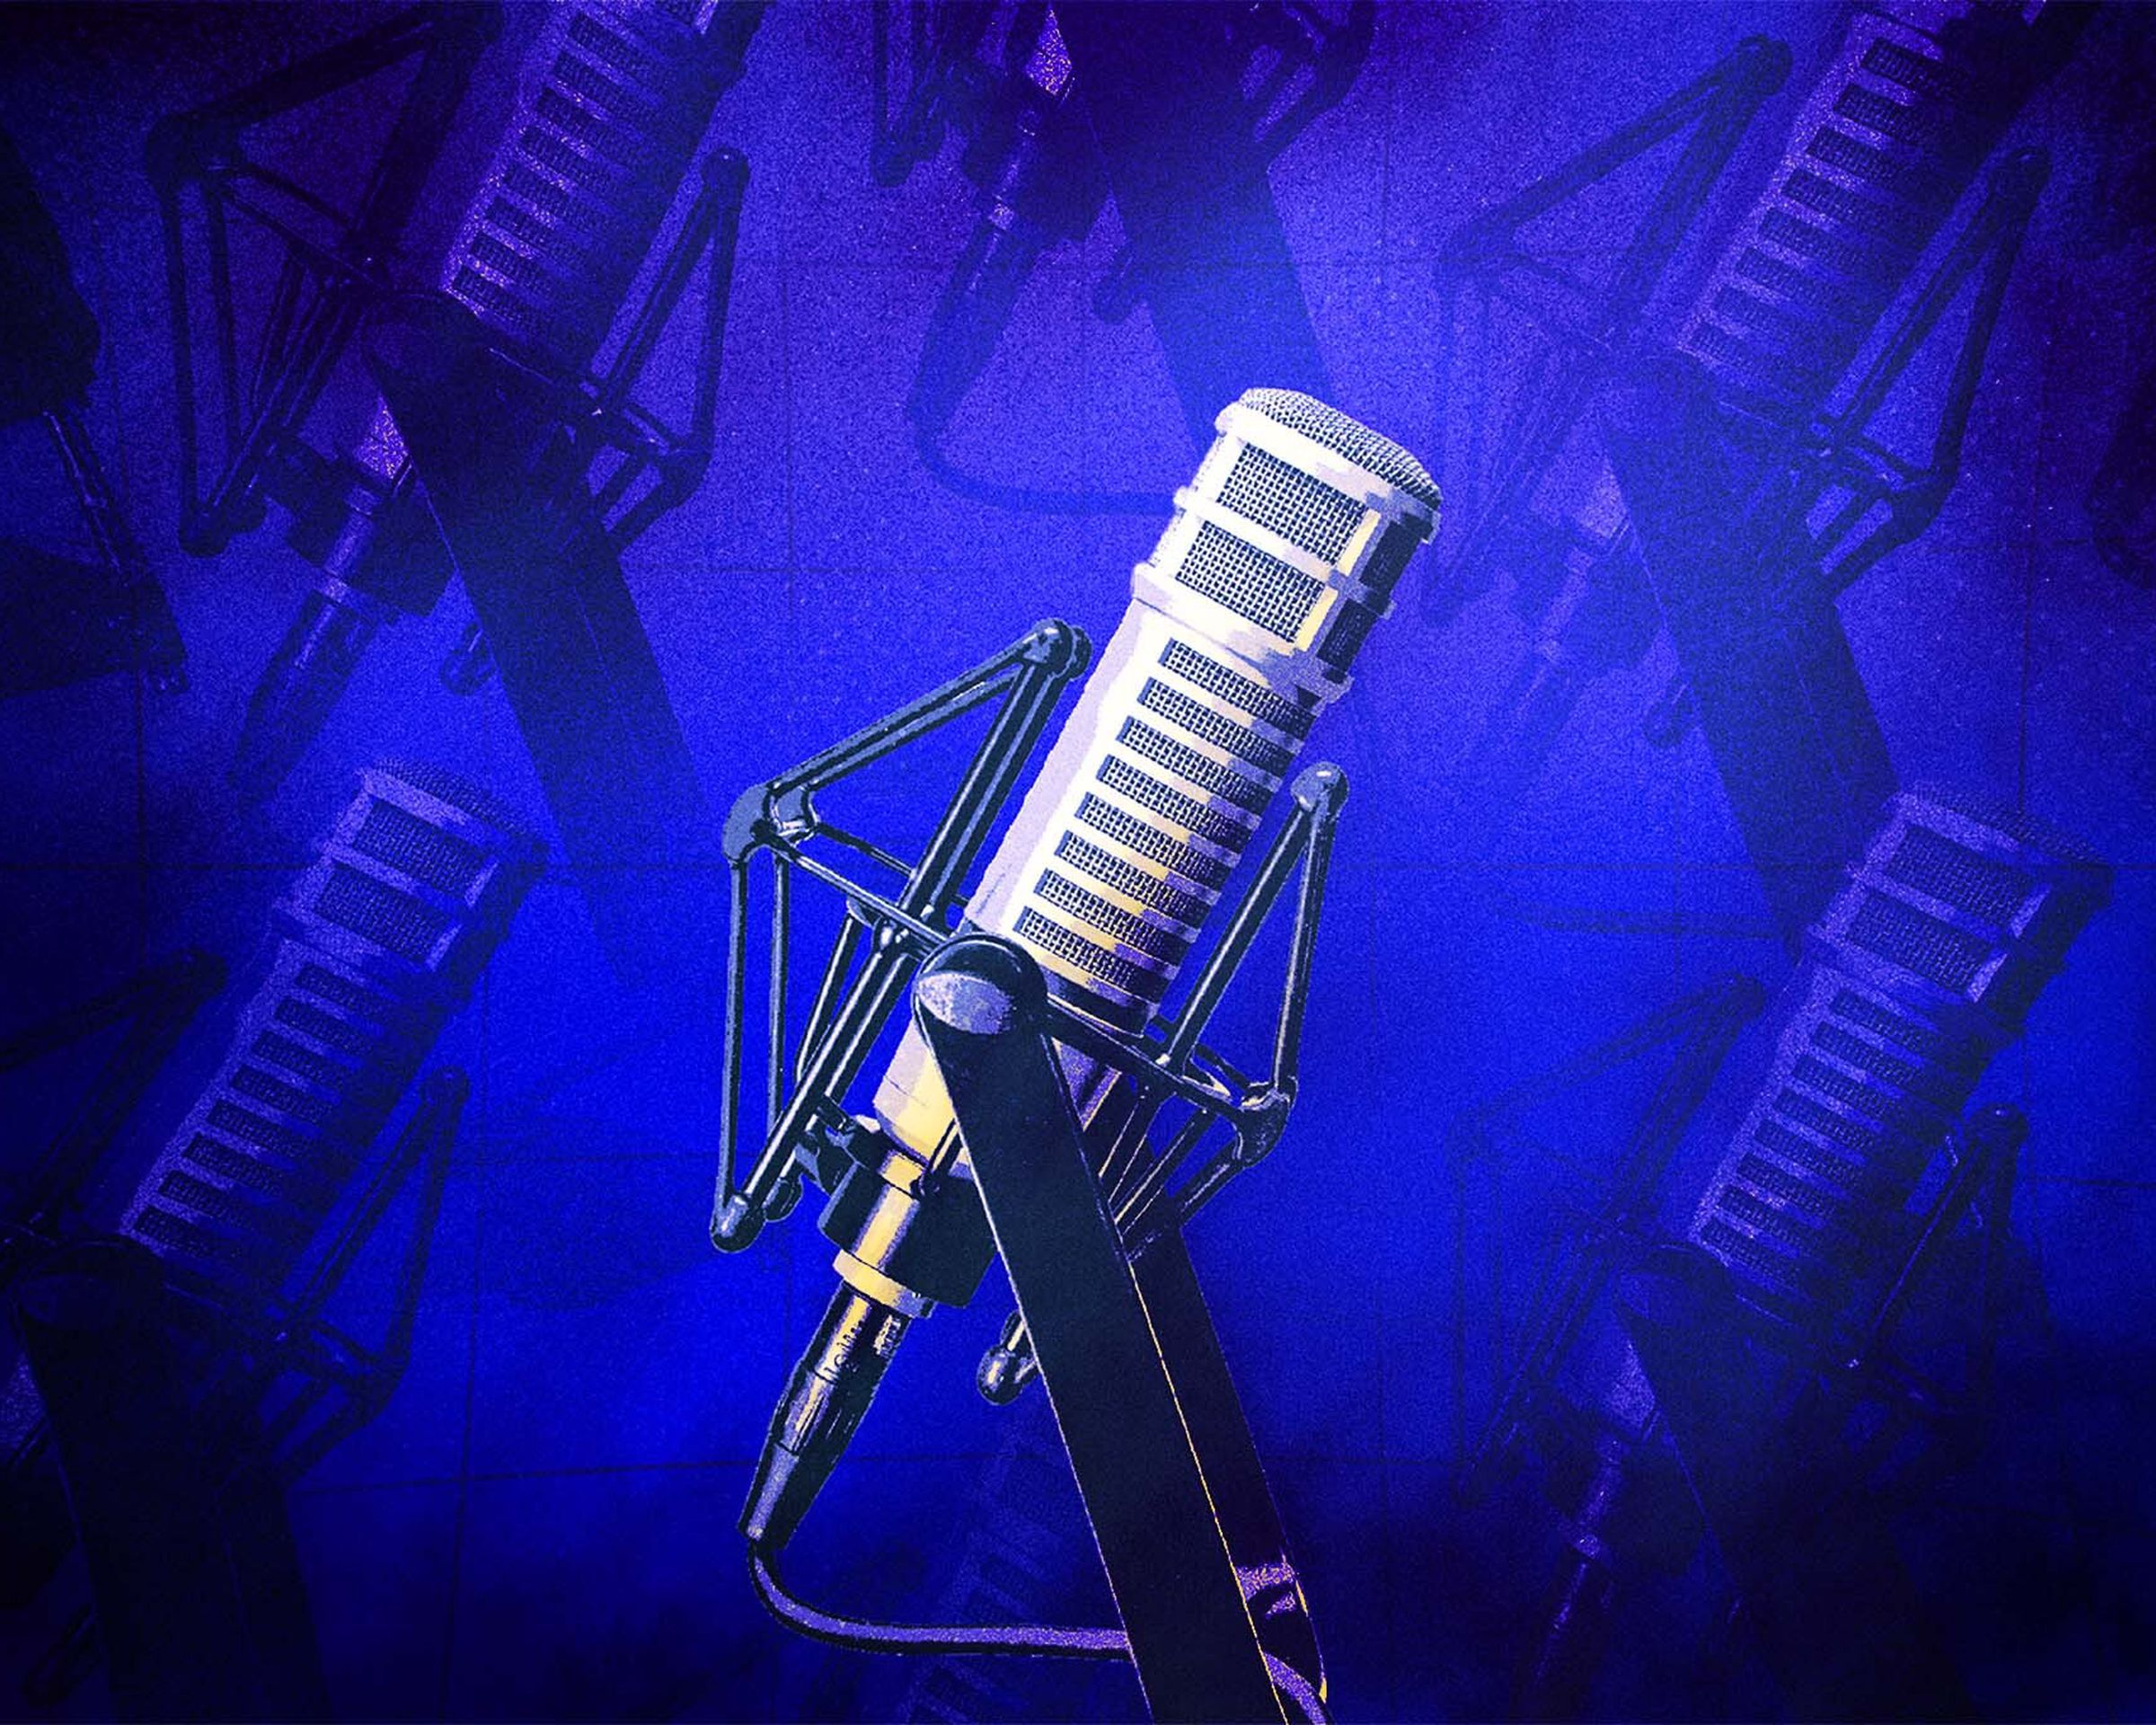 A microphone on a blue background